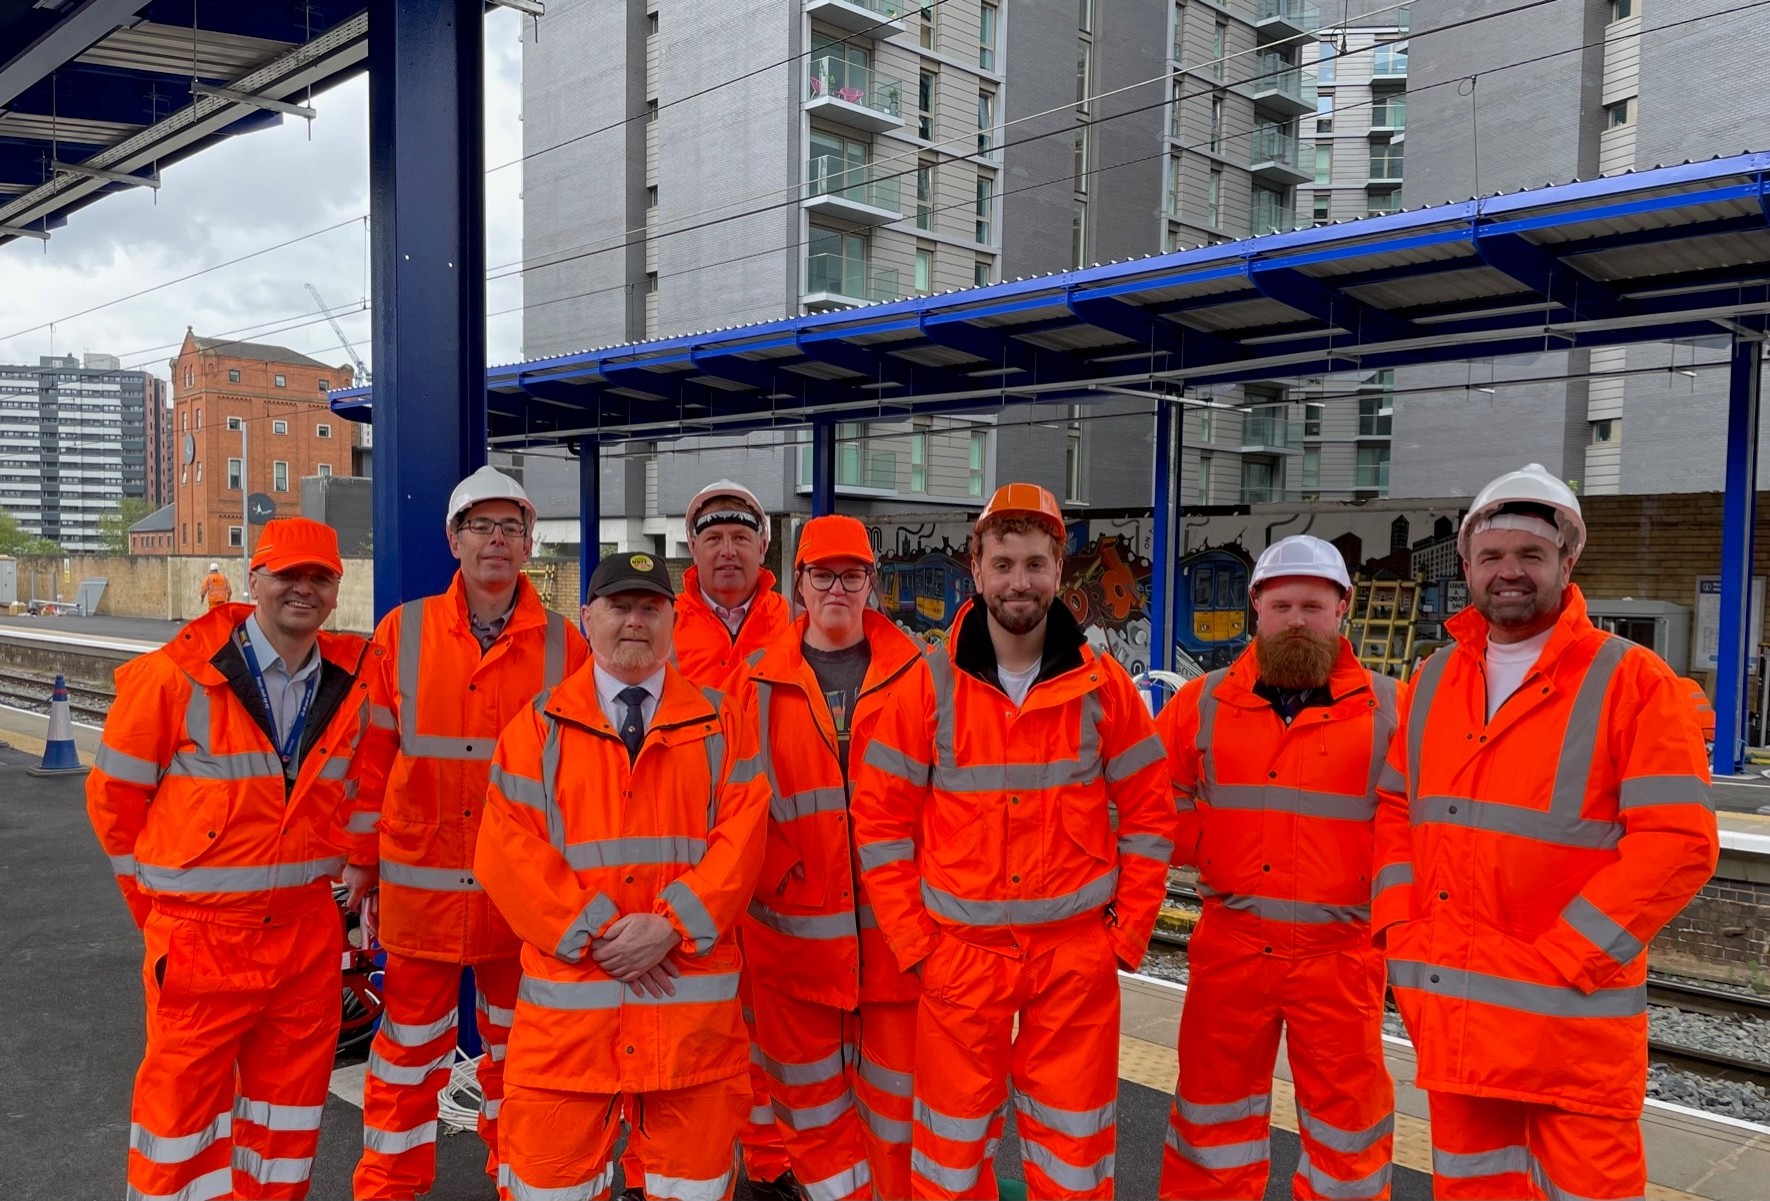 image-shows-engineers-at-salford-central-station-ahead-of-the-re-opening